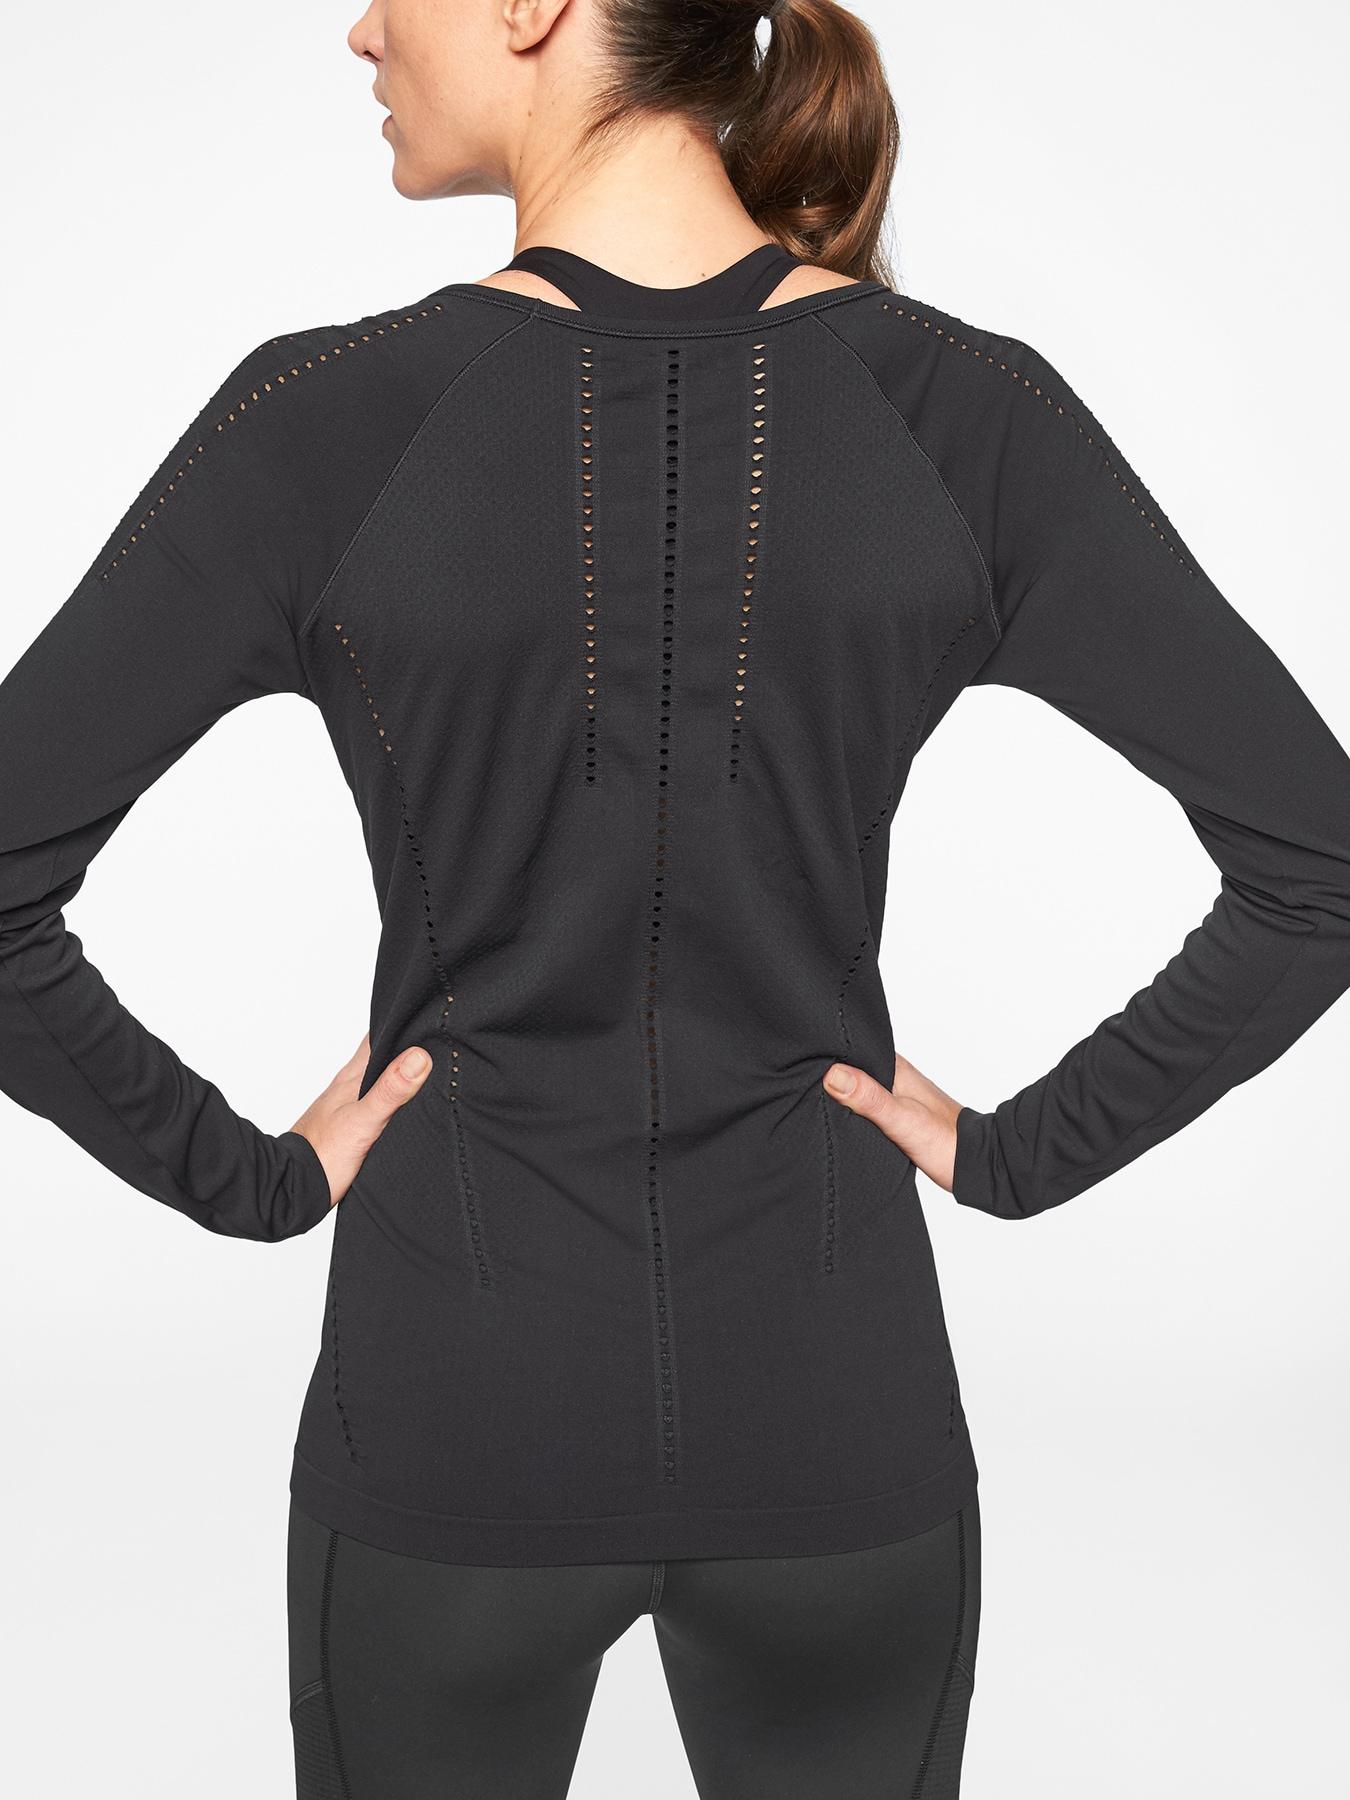 Athleta Synthetic Foothill Long Sleeve in Black - Lyst